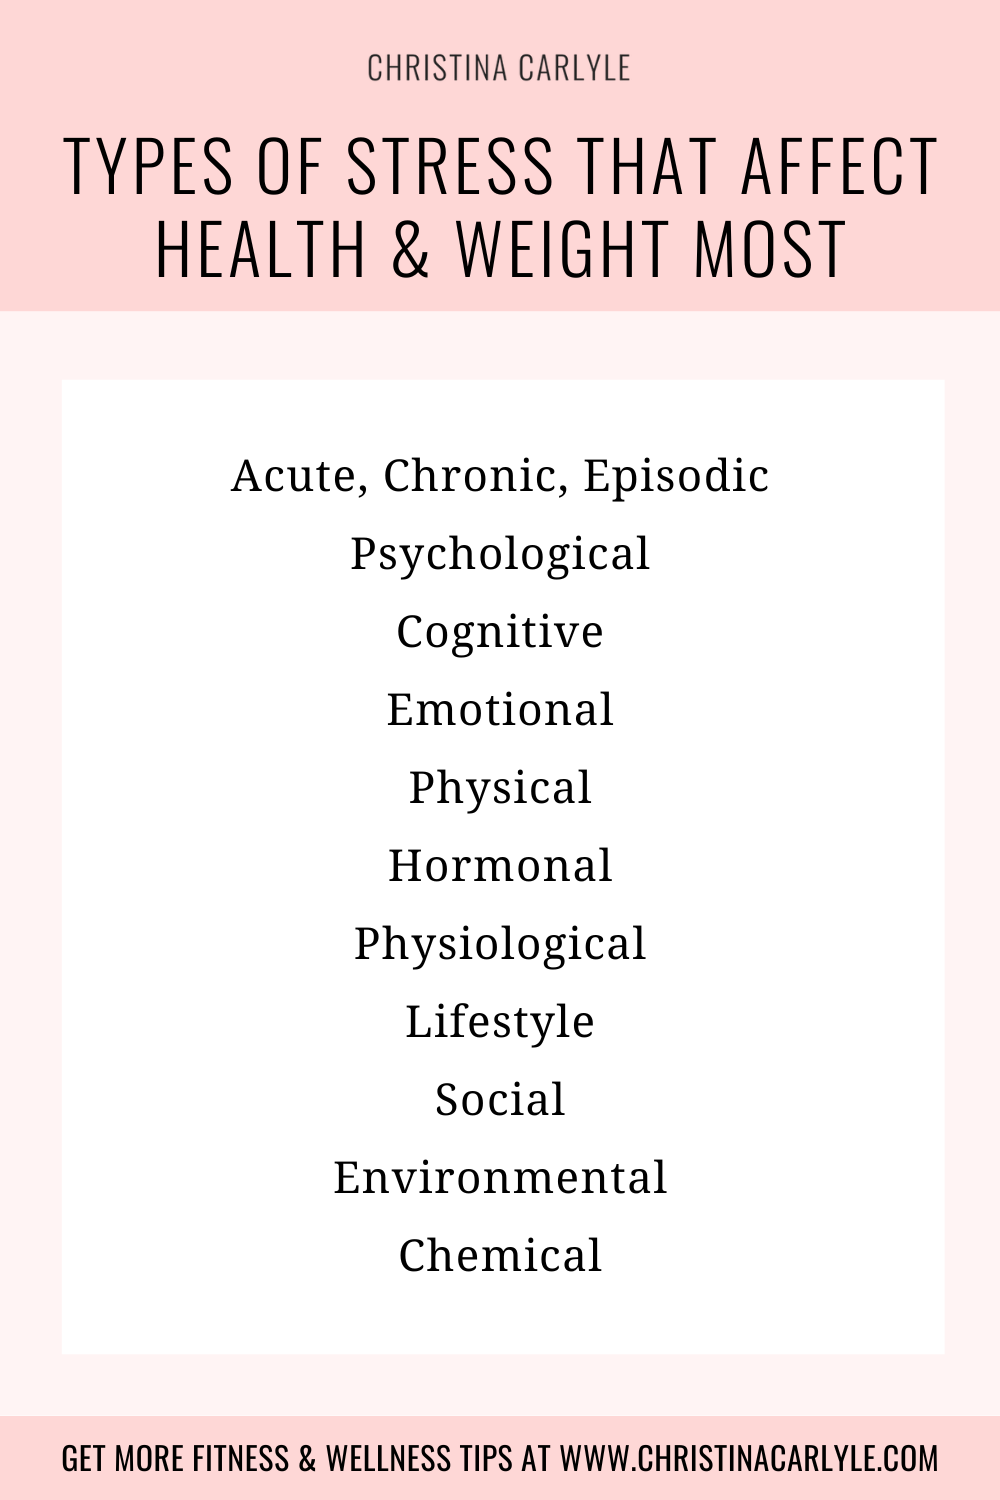 Text that says Types of Stress that Affect Health & Weight Most and A list of the Different Categories of Types of Stress